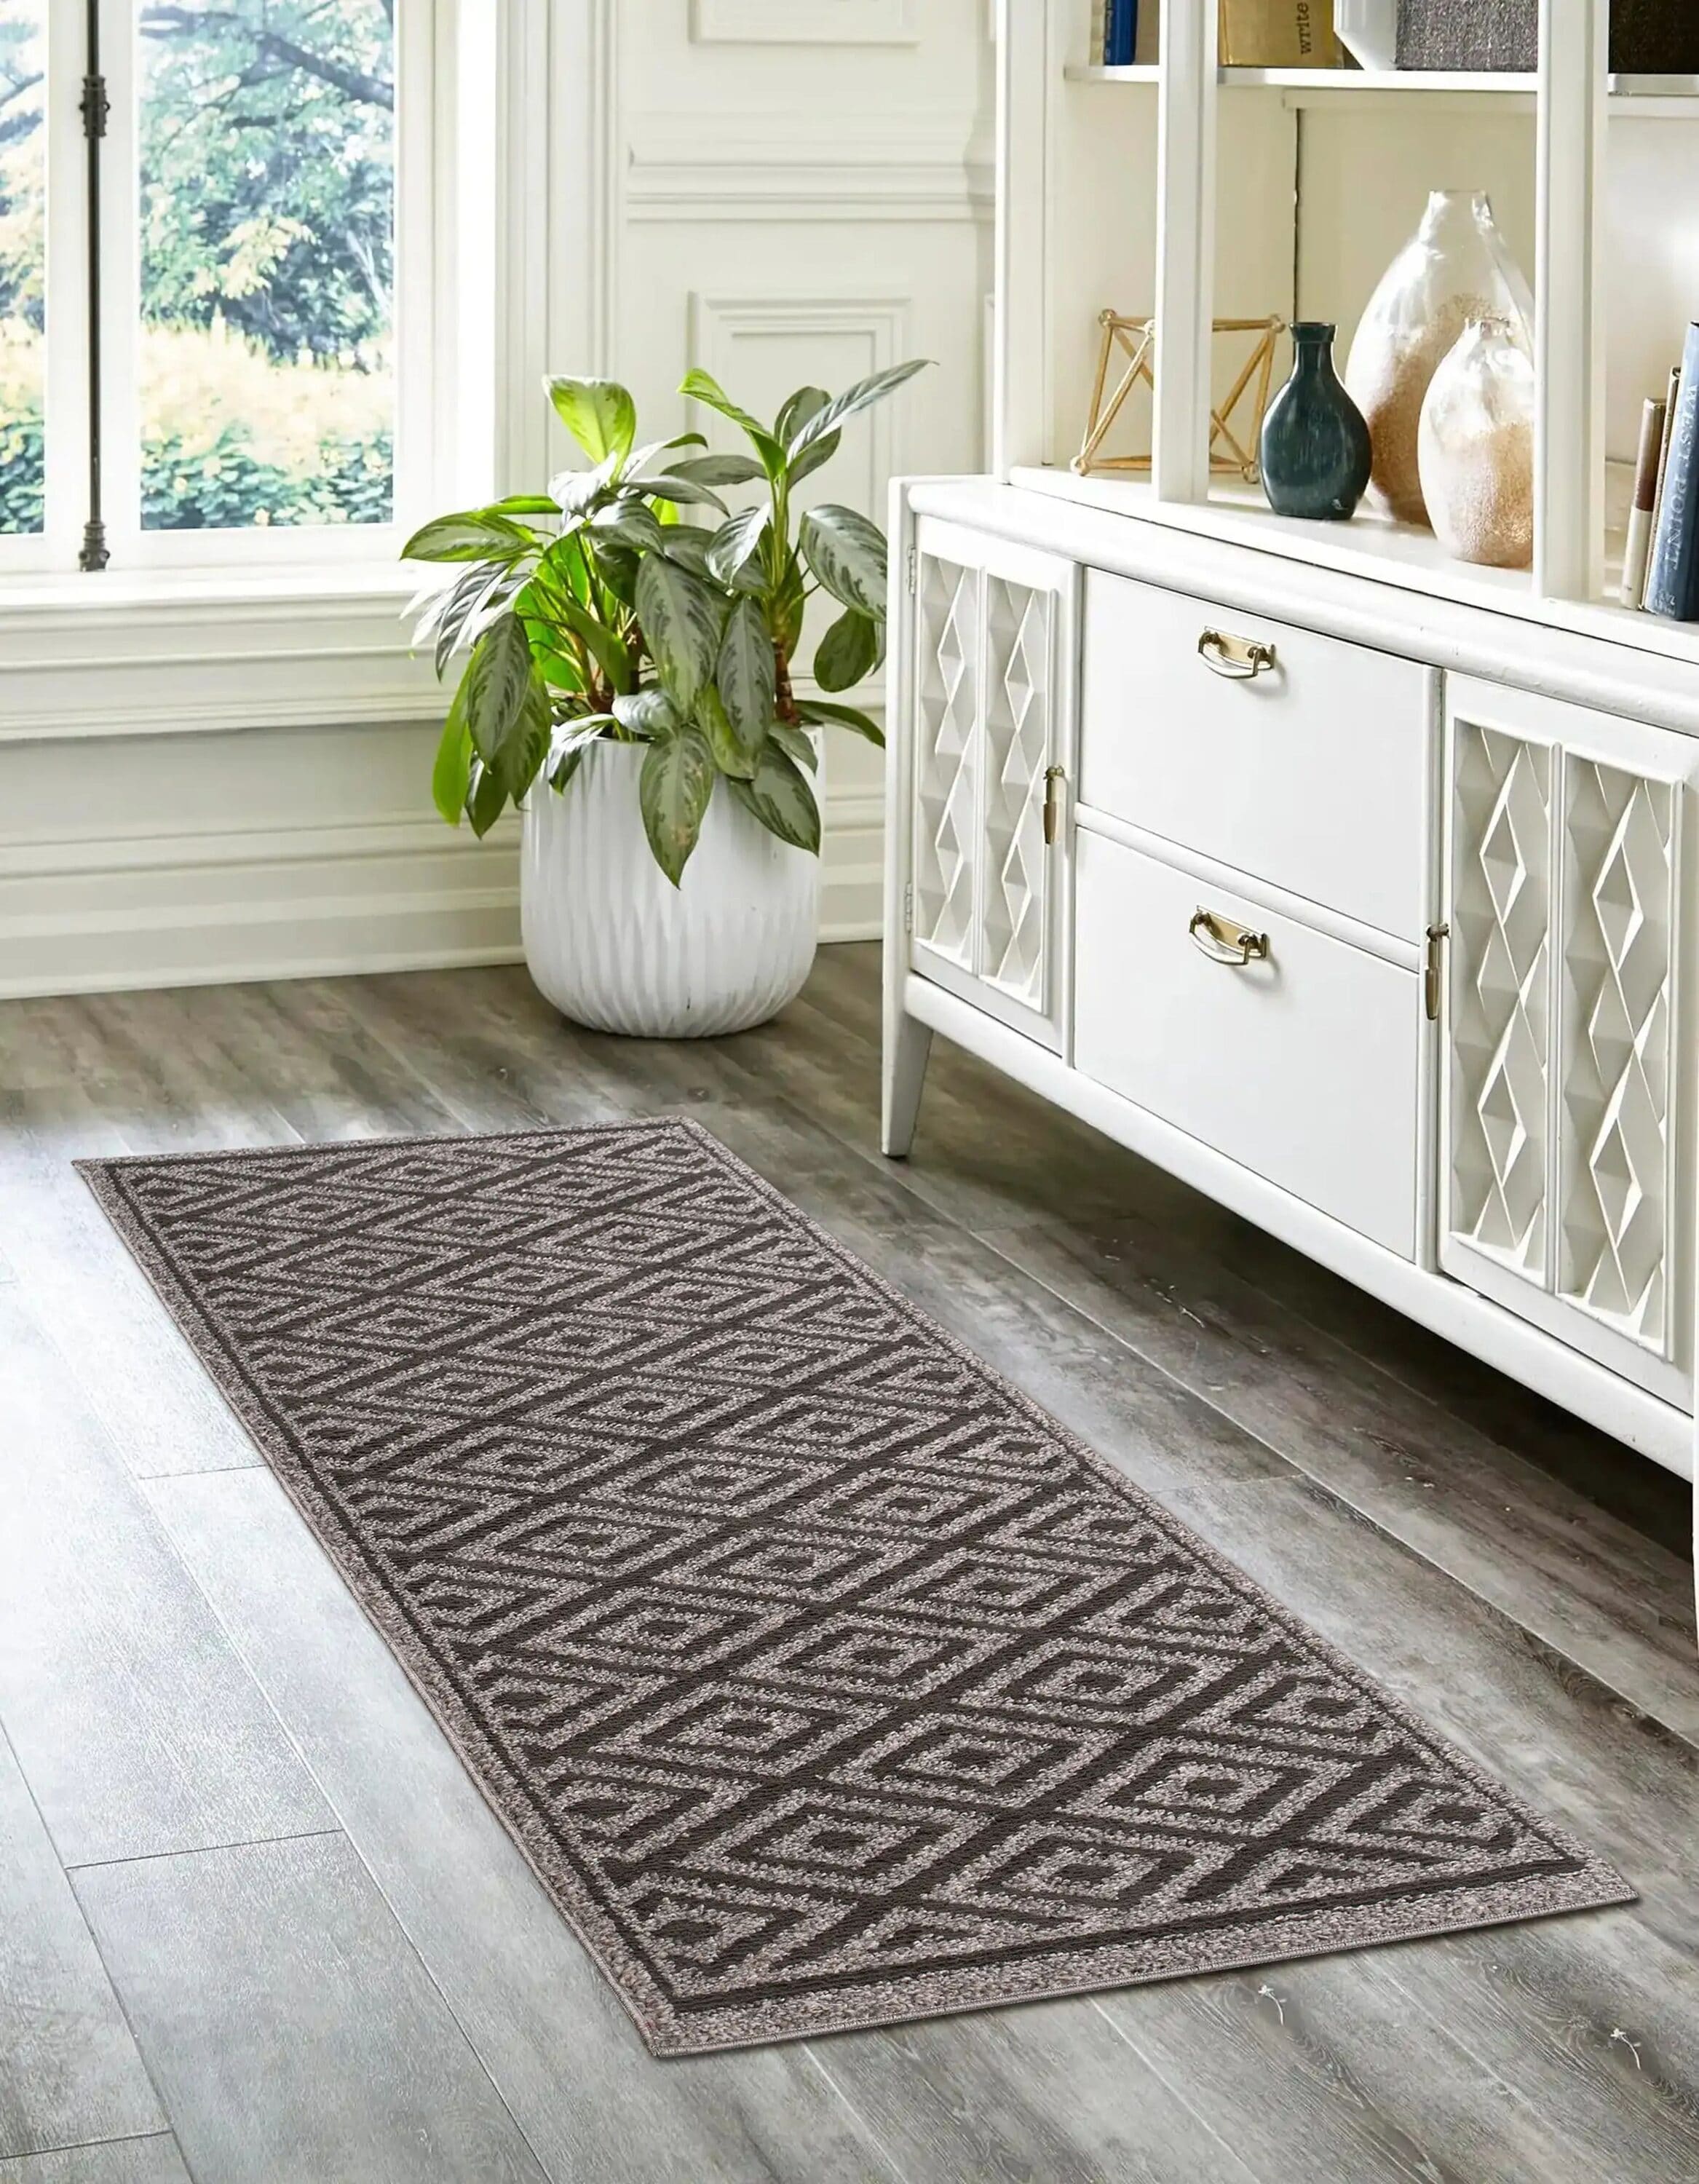 The Sofia Rugs Sofihas 2 Piece Kitchen Rug Sets 60in x 24in x 35in